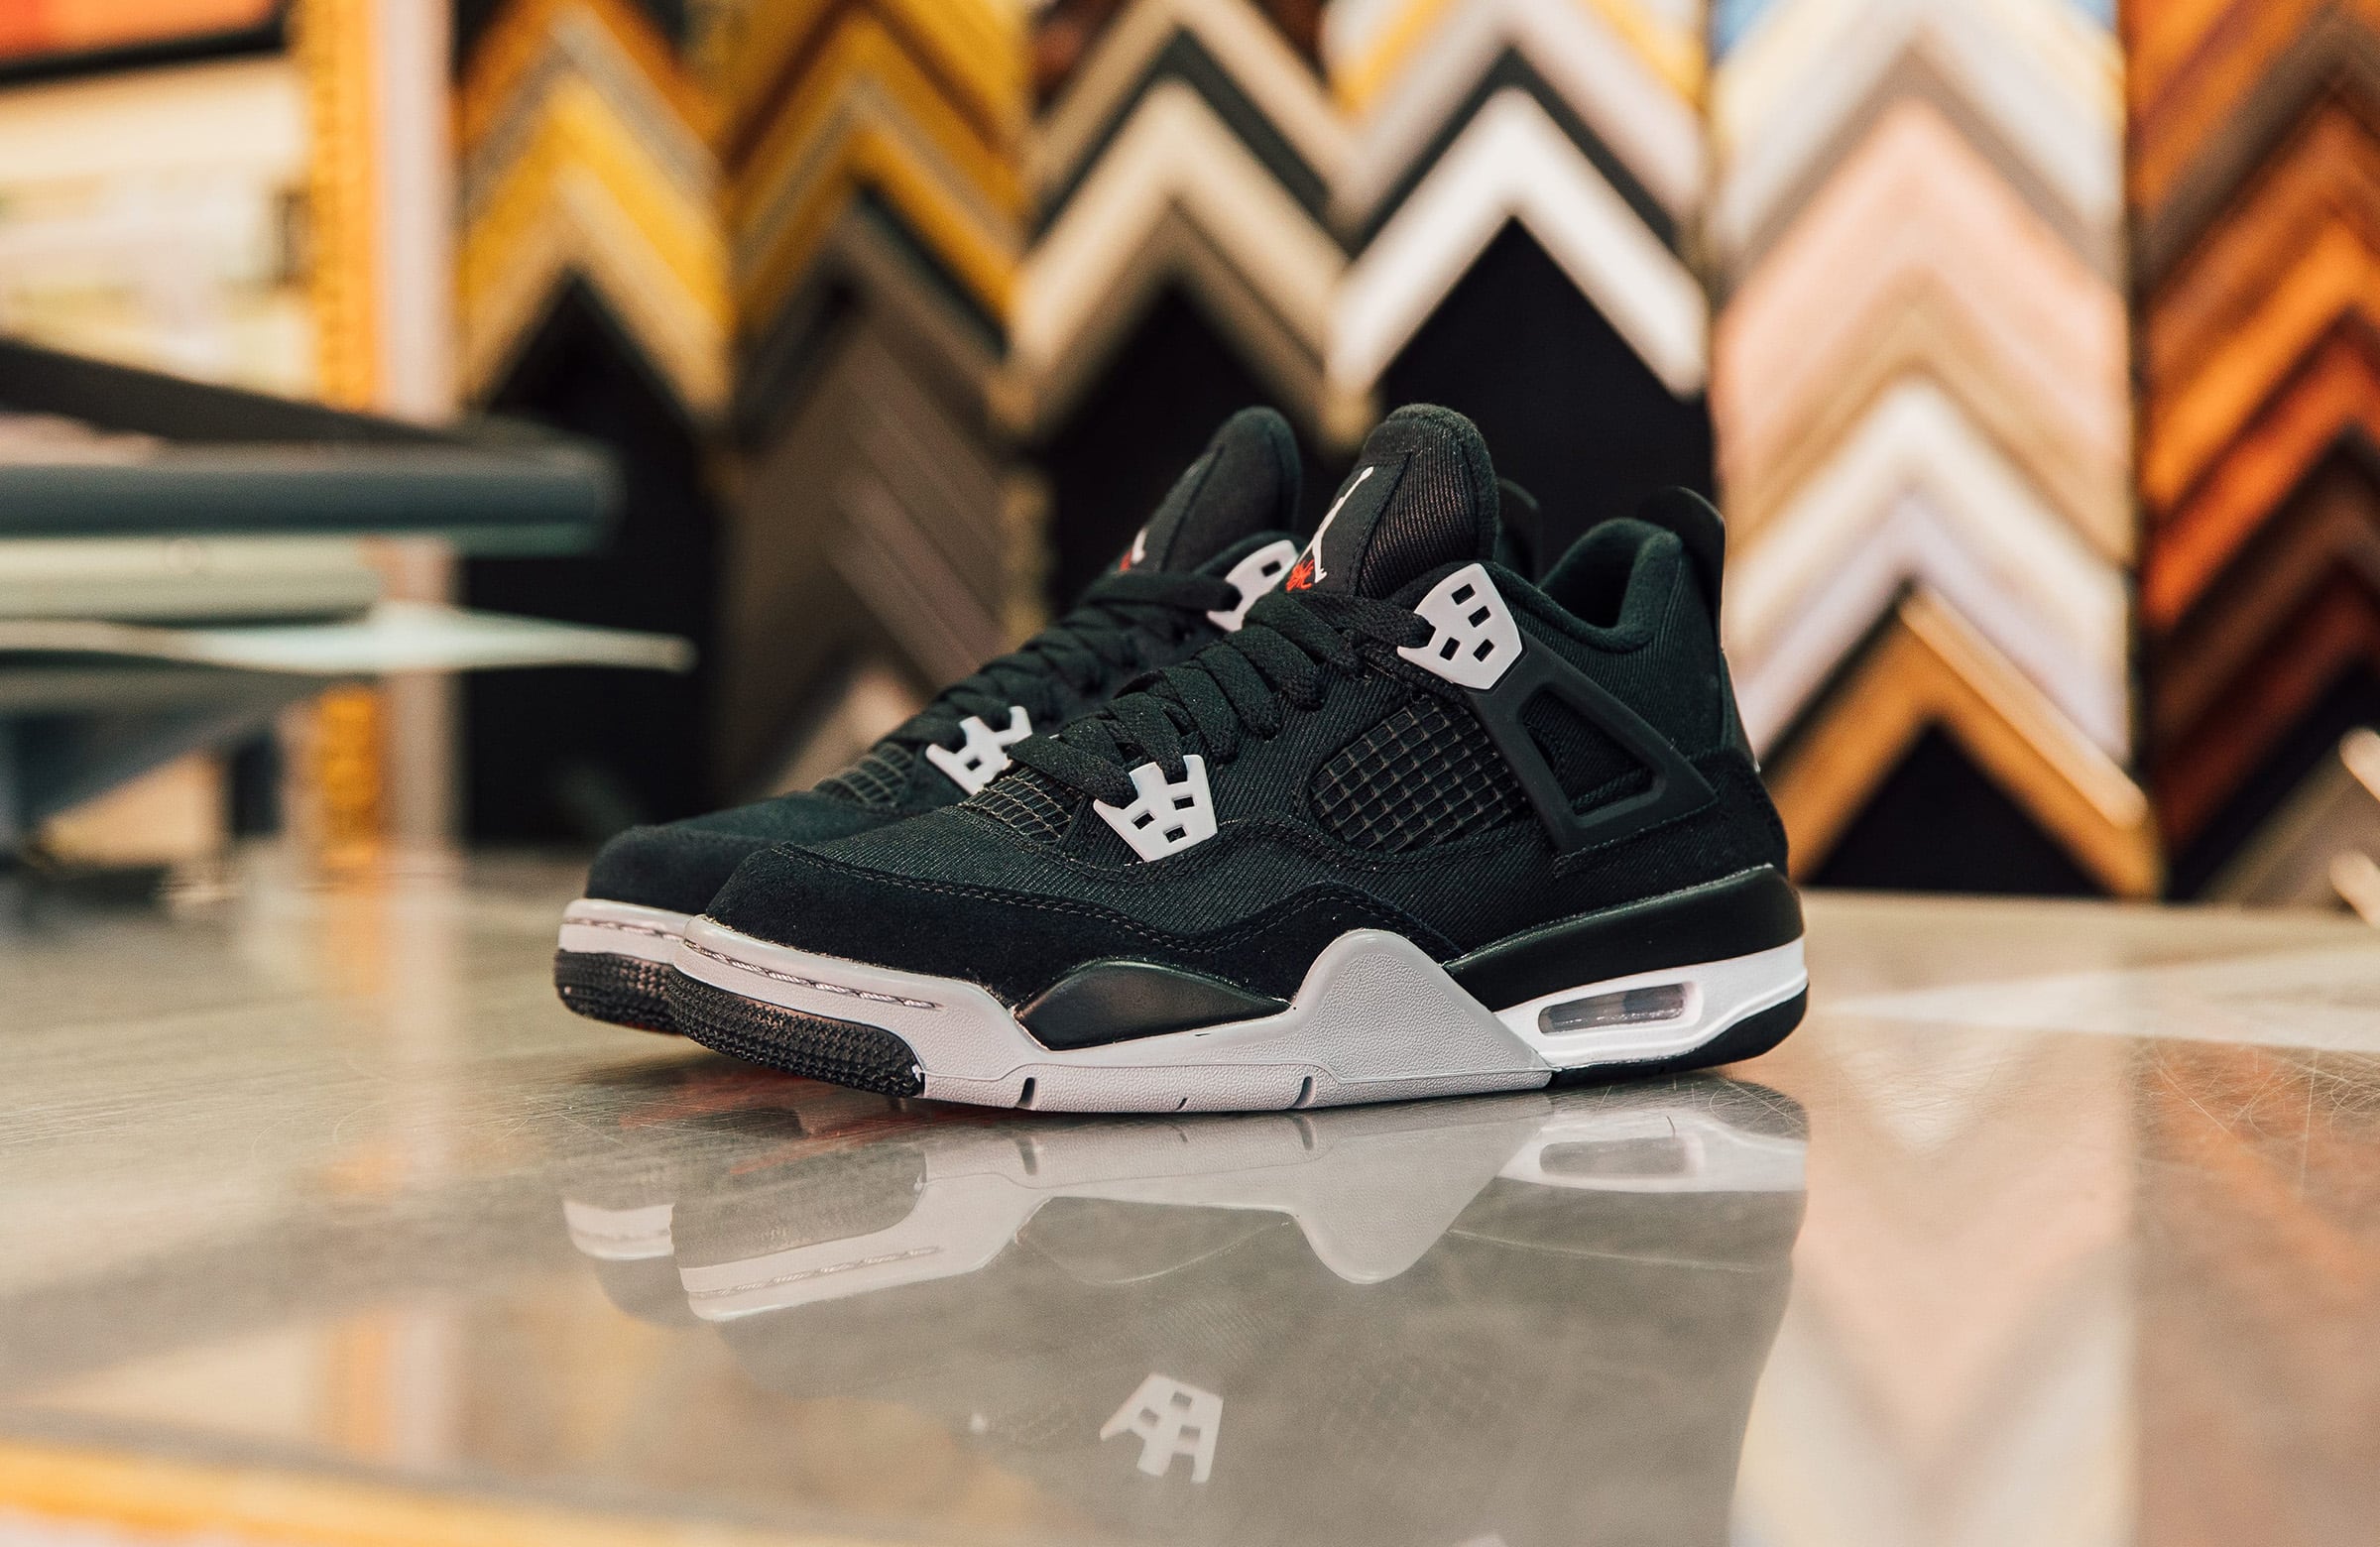 Will the Real Air Jordan 4 Retro “Black Canvas” Please Stand Up? – DTLR